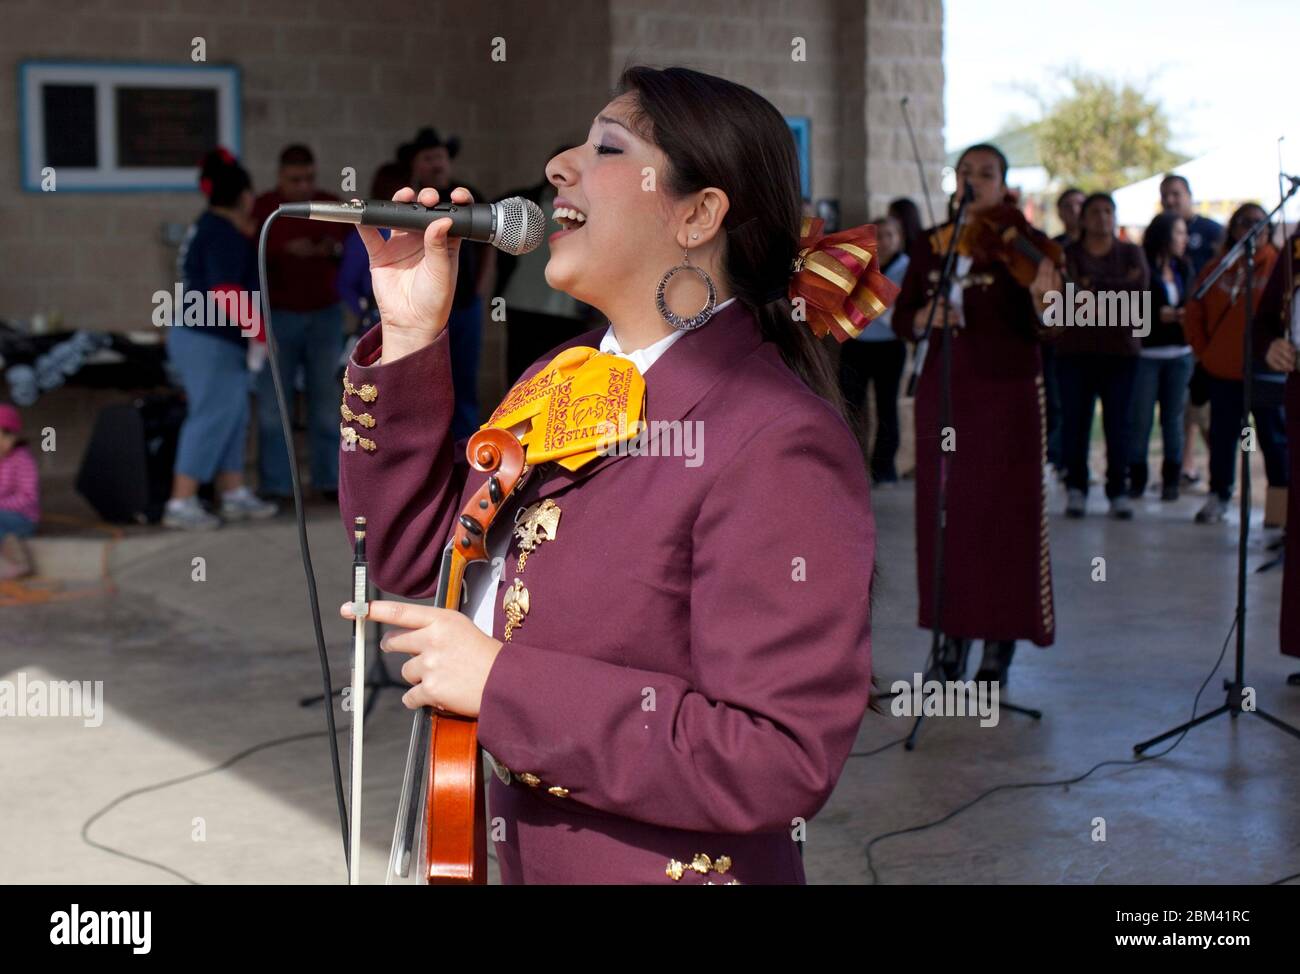 Kyle, Texas USA, November 2011: Members of Mariachi Nueva Generacion from Texas State University perform at a 'Day of the Dead' or Dia de Los Muertos celebration. Day of the Dead is a Mexican national holiday and focuses on gatherings of family and friends to pray for a departed loved ones. ©Bob Daemmrich Stock Photo